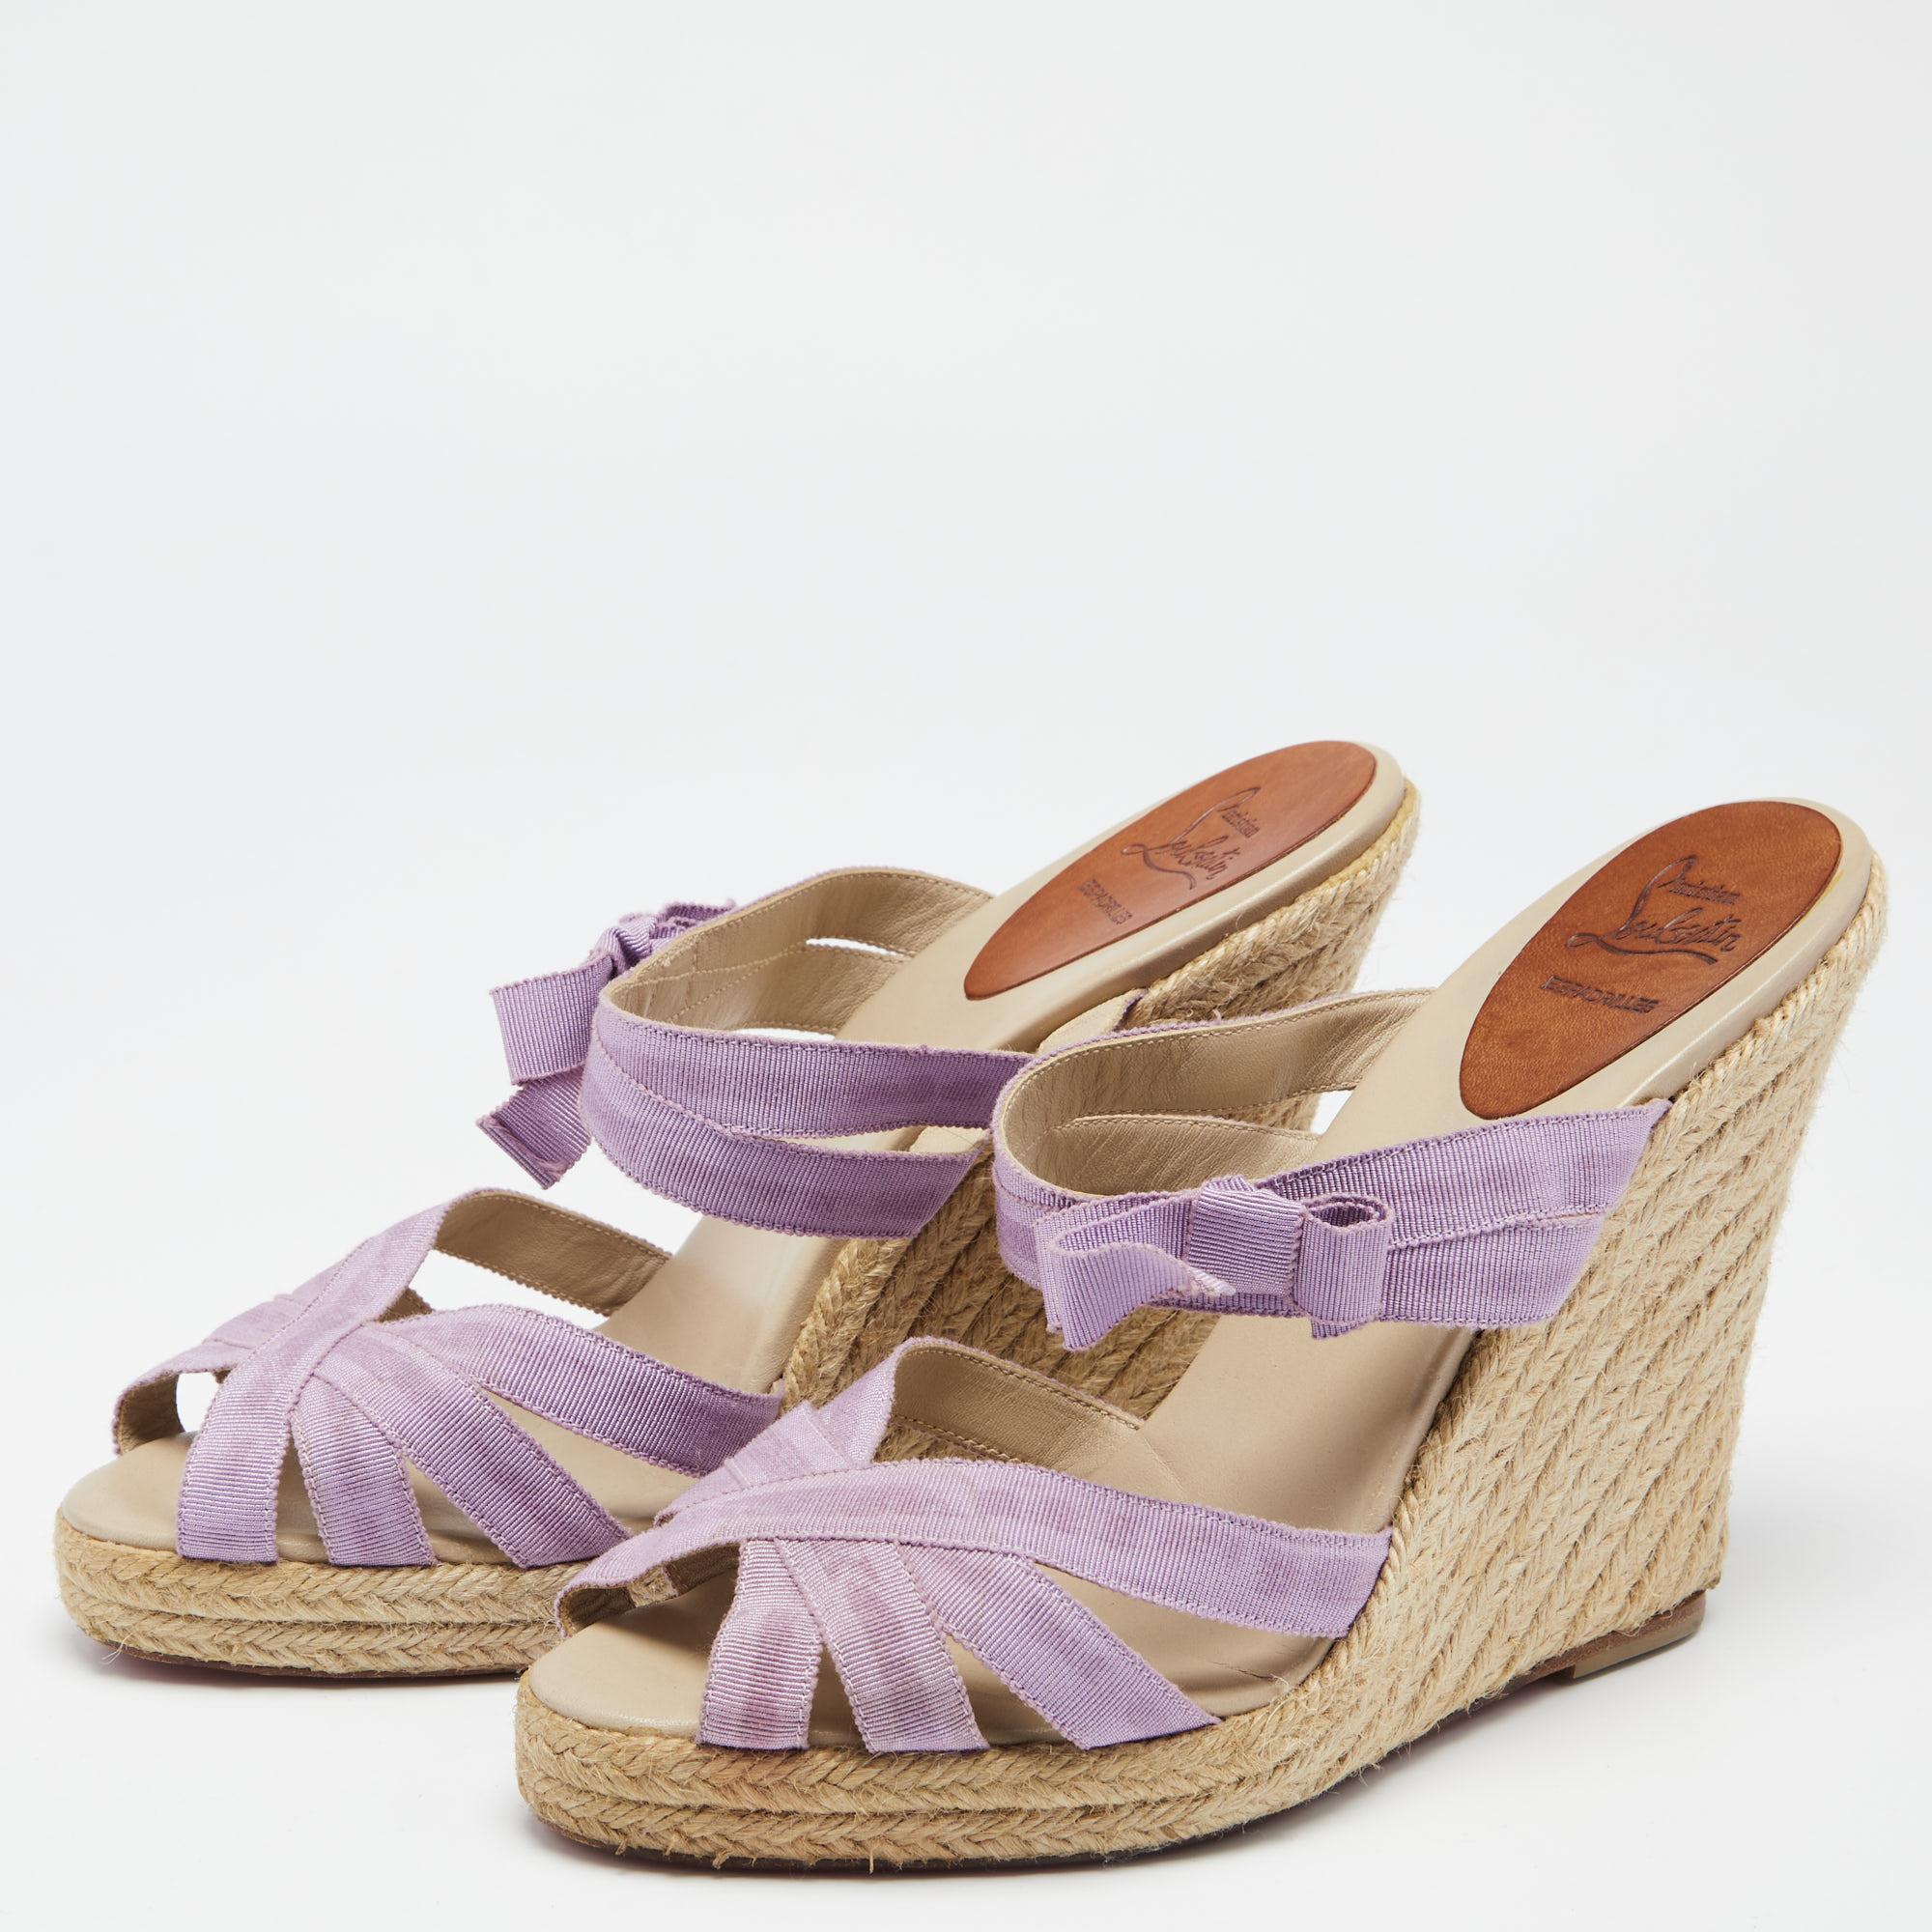 Christian Louboutin brings a perfect pair for the summer season! These sandals come with a purple-hued strappy upper that will frame your feet in the most elegant way. The espadrille wedge heels are supported by platforms for the comfort of your